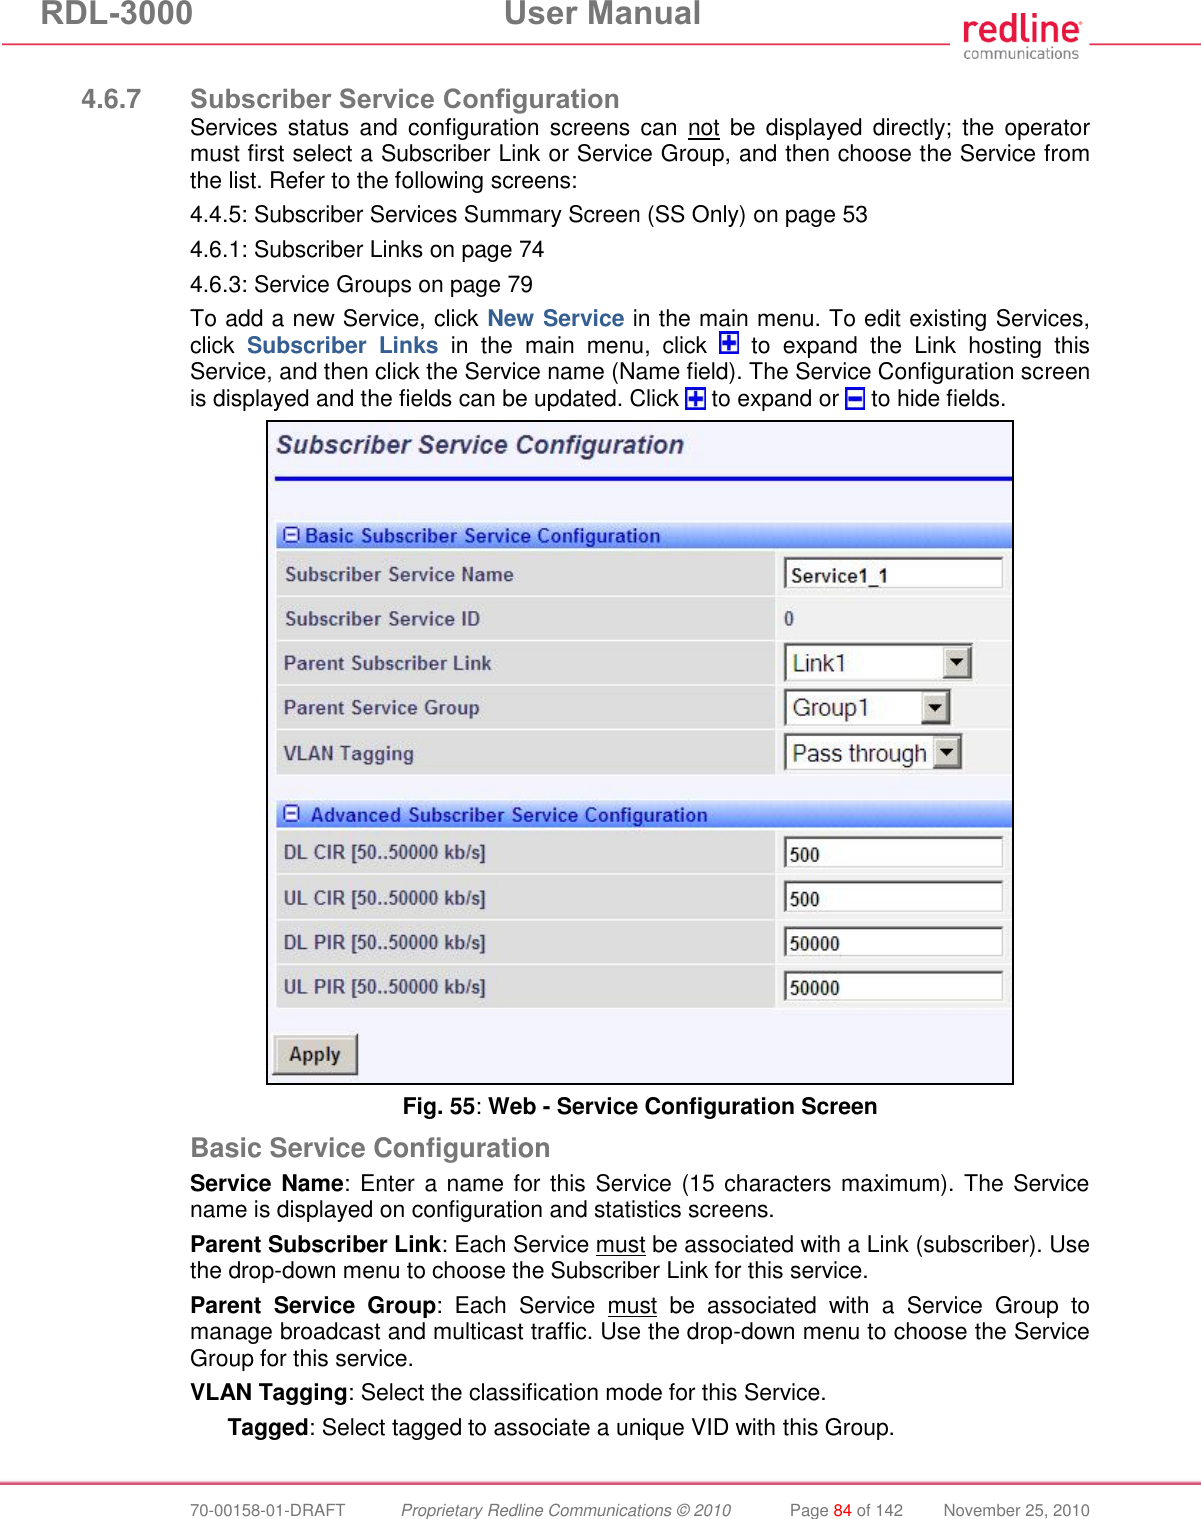 RDL-3000  User Manual  70-00158-01-DRAFT  Proprietary Redline Communications © 2010  Page 84 of 142  November 25, 2010  4.6.7 Subscriber Service Configuration Services status  and  configuration screens  can  not  be  displayed  directly;  the  operator must first select a Subscriber Link or Service Group, and then choose the Service from the list. Refer to the following screens: 4.4.5: Subscriber Services Summary Screen (SS Only) on page 53 4.6.1: Subscriber Links on page 74 4.6.3: Service Groups on page 79 To add a new Service, click New Service in the main menu. To edit existing Services, click  Subscriber  Links  in  the  main  menu,  click    to  expand  the  Link  hosting  this Service, and then click the Service name (Name field). The Service Configuration screen is displayed and the fields can be updated. Click   to expand or   to hide fields.  Fig. 55: Web - Service Configuration Screen Basic Service Configuration Service Name:  Enter a name for this Service (15 characters maximum). The  Service name is displayed on configuration and statistics screens. Parent Subscriber Link: Each Service must be associated with a Link (subscriber). Use the drop-down menu to choose the Subscriber Link for this service. Parent  Service  Group:  Each  Service  must  be  associated  with  a  Service  Group  to manage broadcast and multicast traffic. Use the drop-down menu to choose the Service Group for this service. VLAN Tagging: Select the classification mode for this Service. Tagged: Select tagged to associate a unique VID with this Group. 